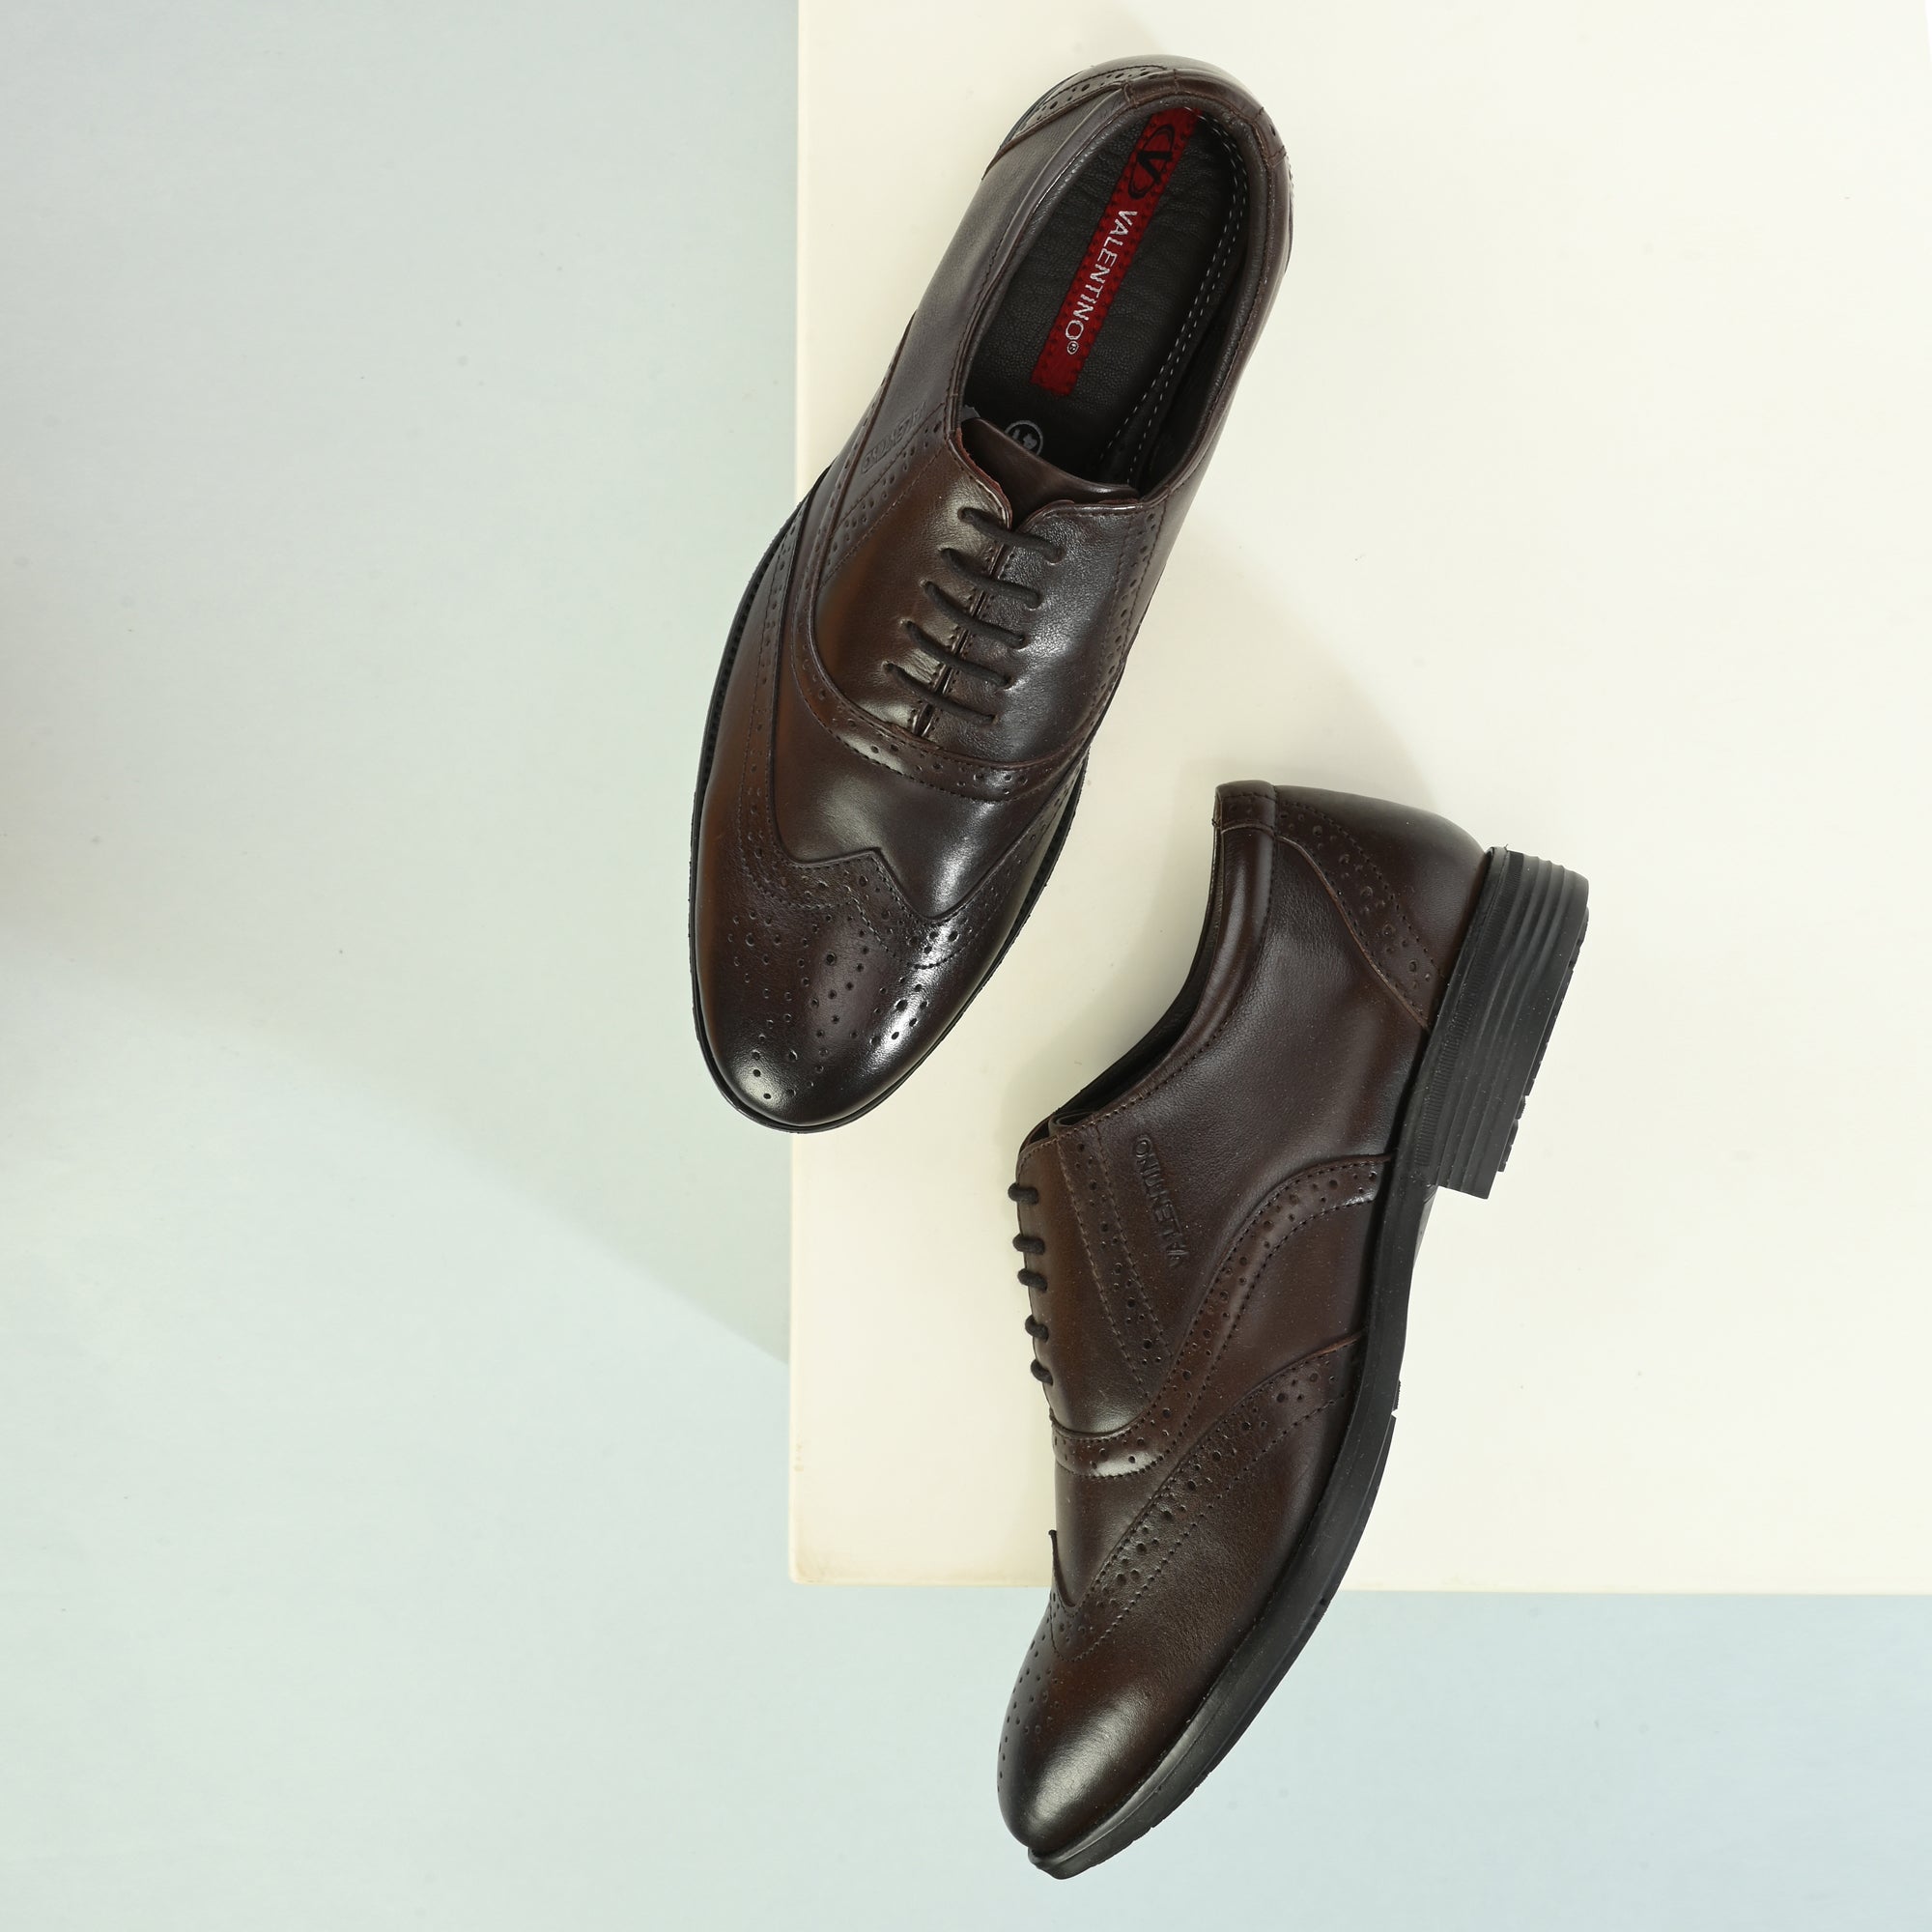 COSMO-70 MEN LEATHER BROWN FORMAL LACE UP DERBY